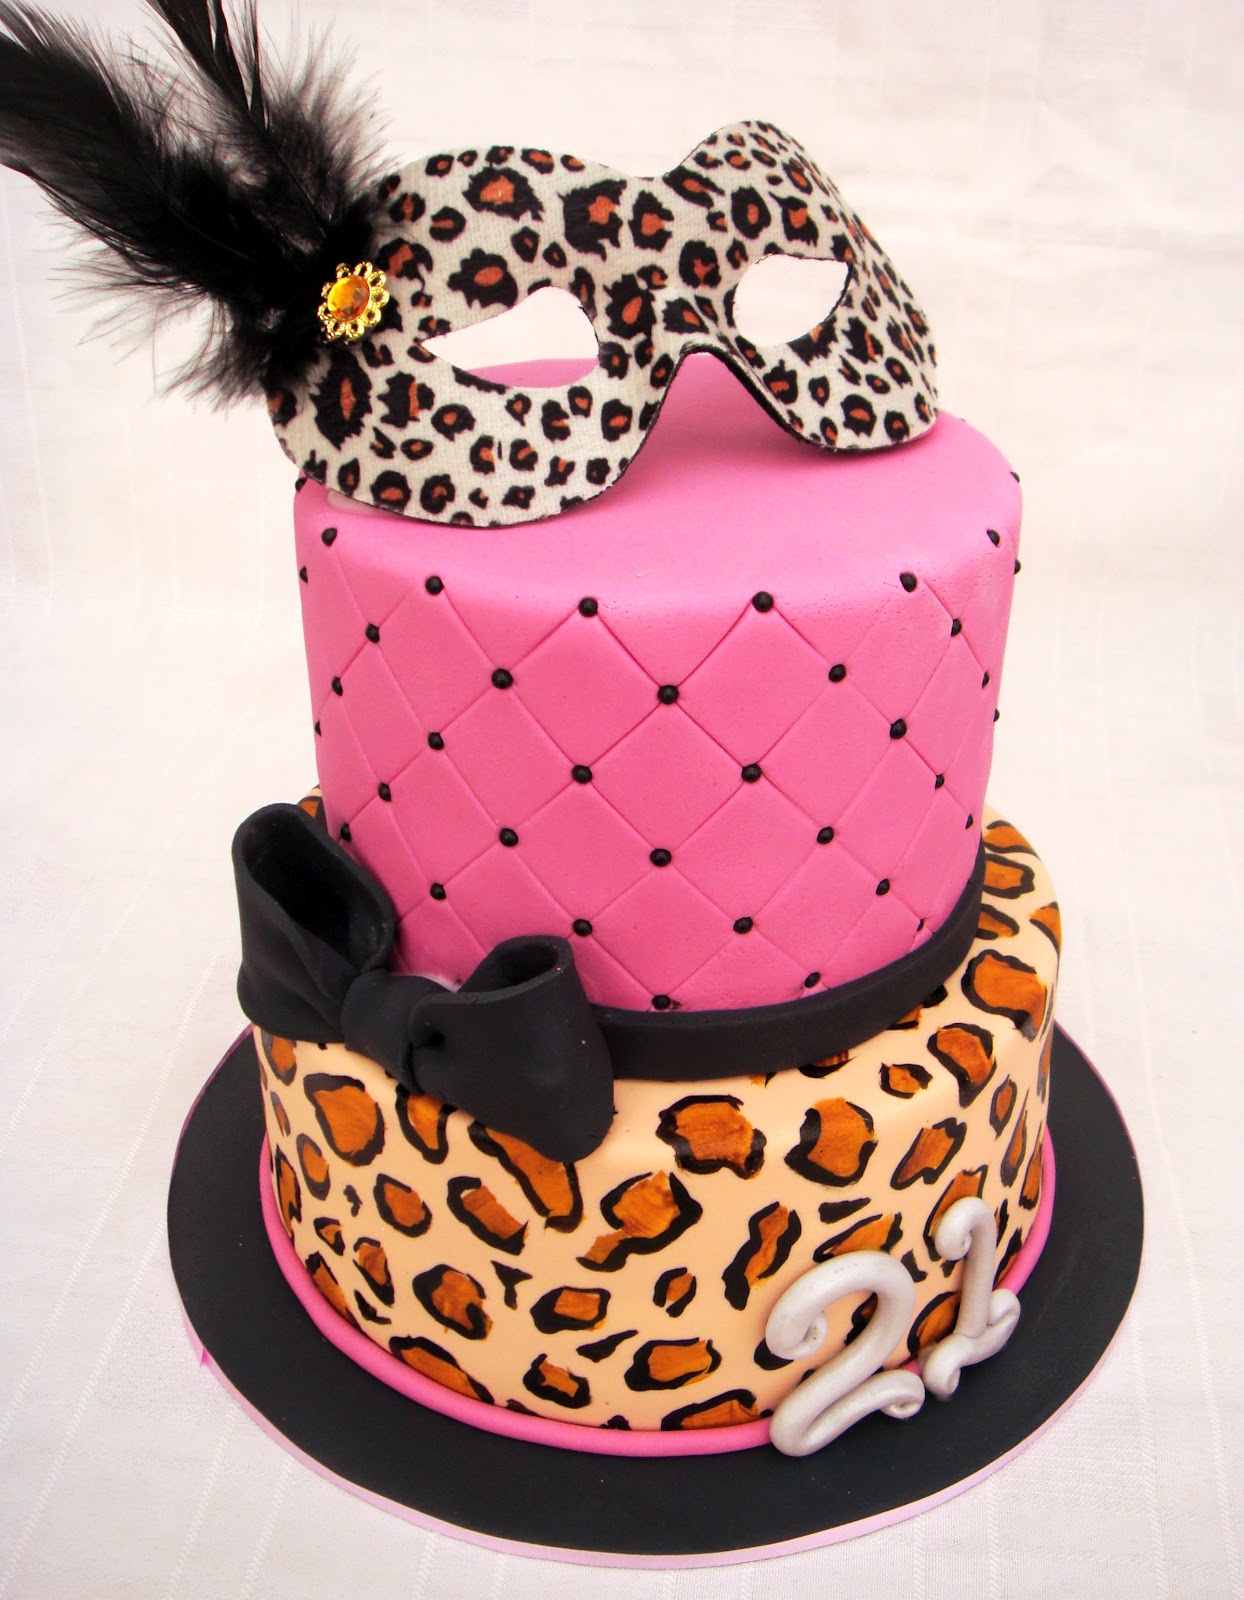 Black and Pink Leopard Birthday Cake